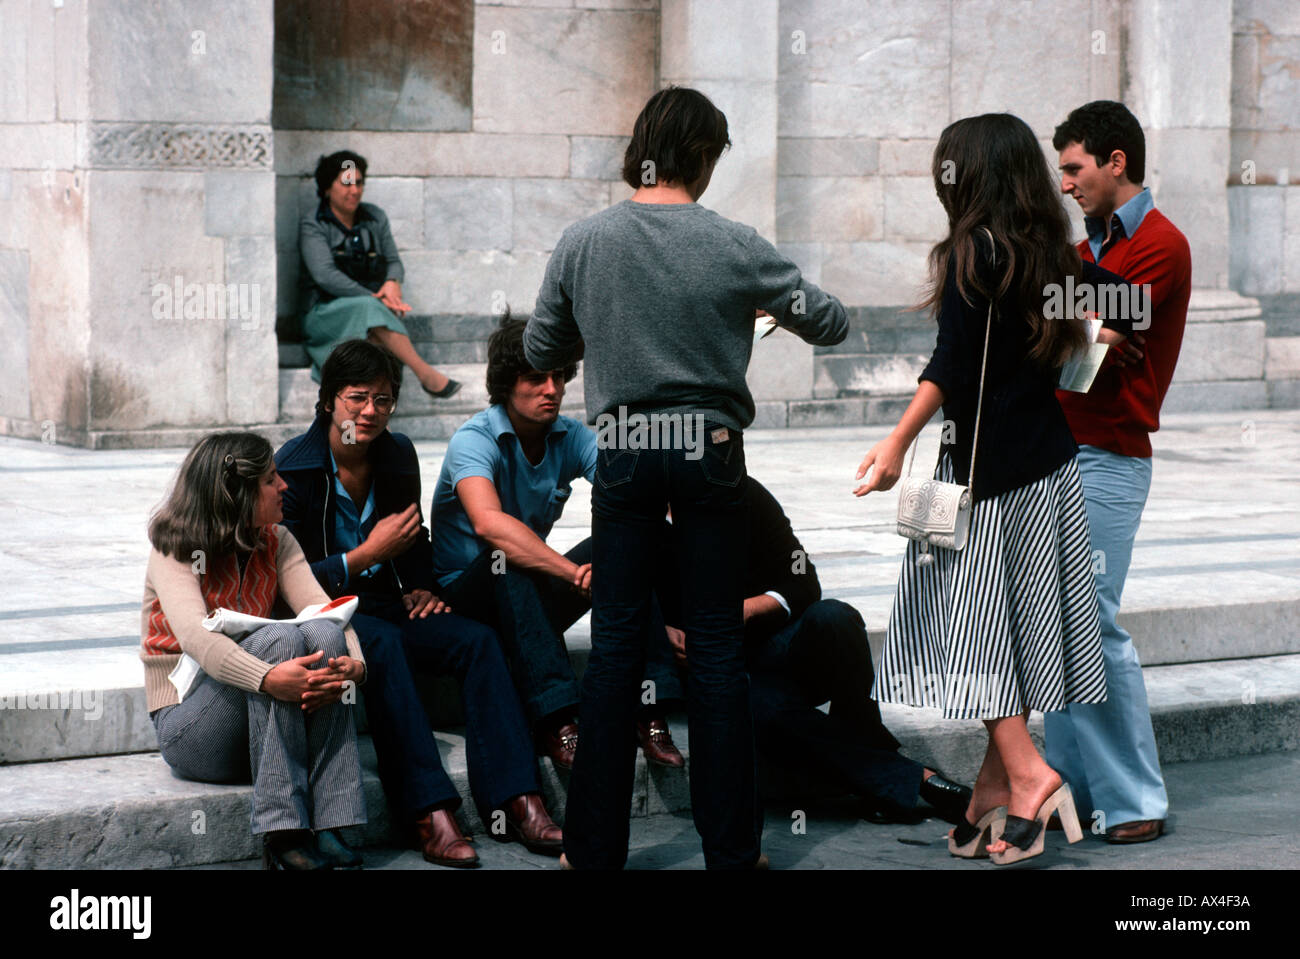 Students having a discussion on some steps in Italy Stock Photo